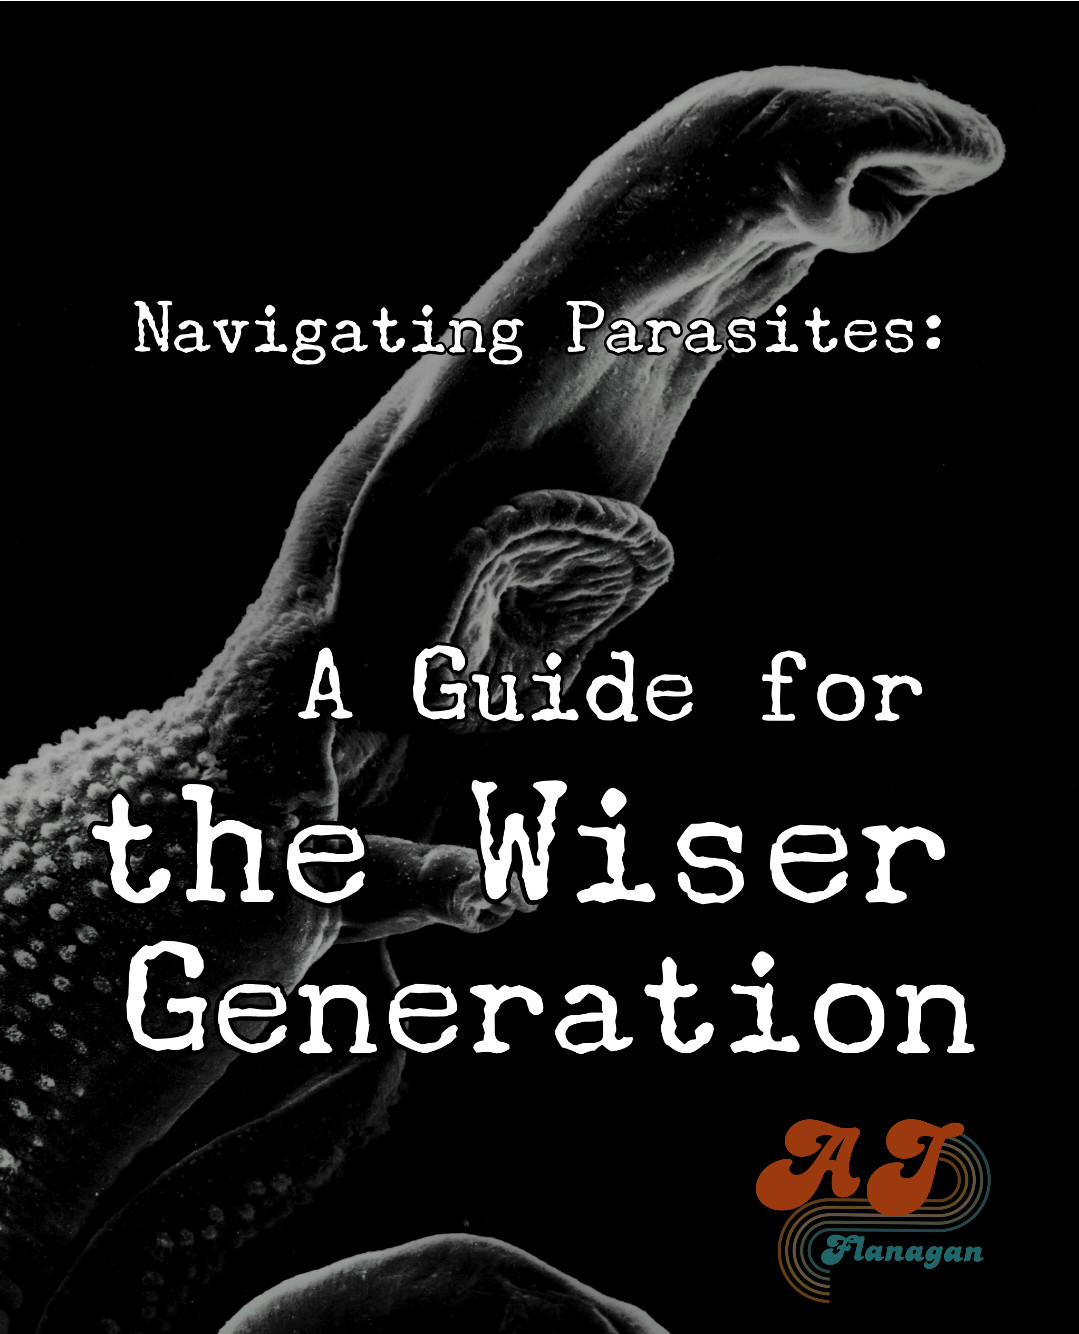 Navigating Parasites: A Guide for the Wiser Generation